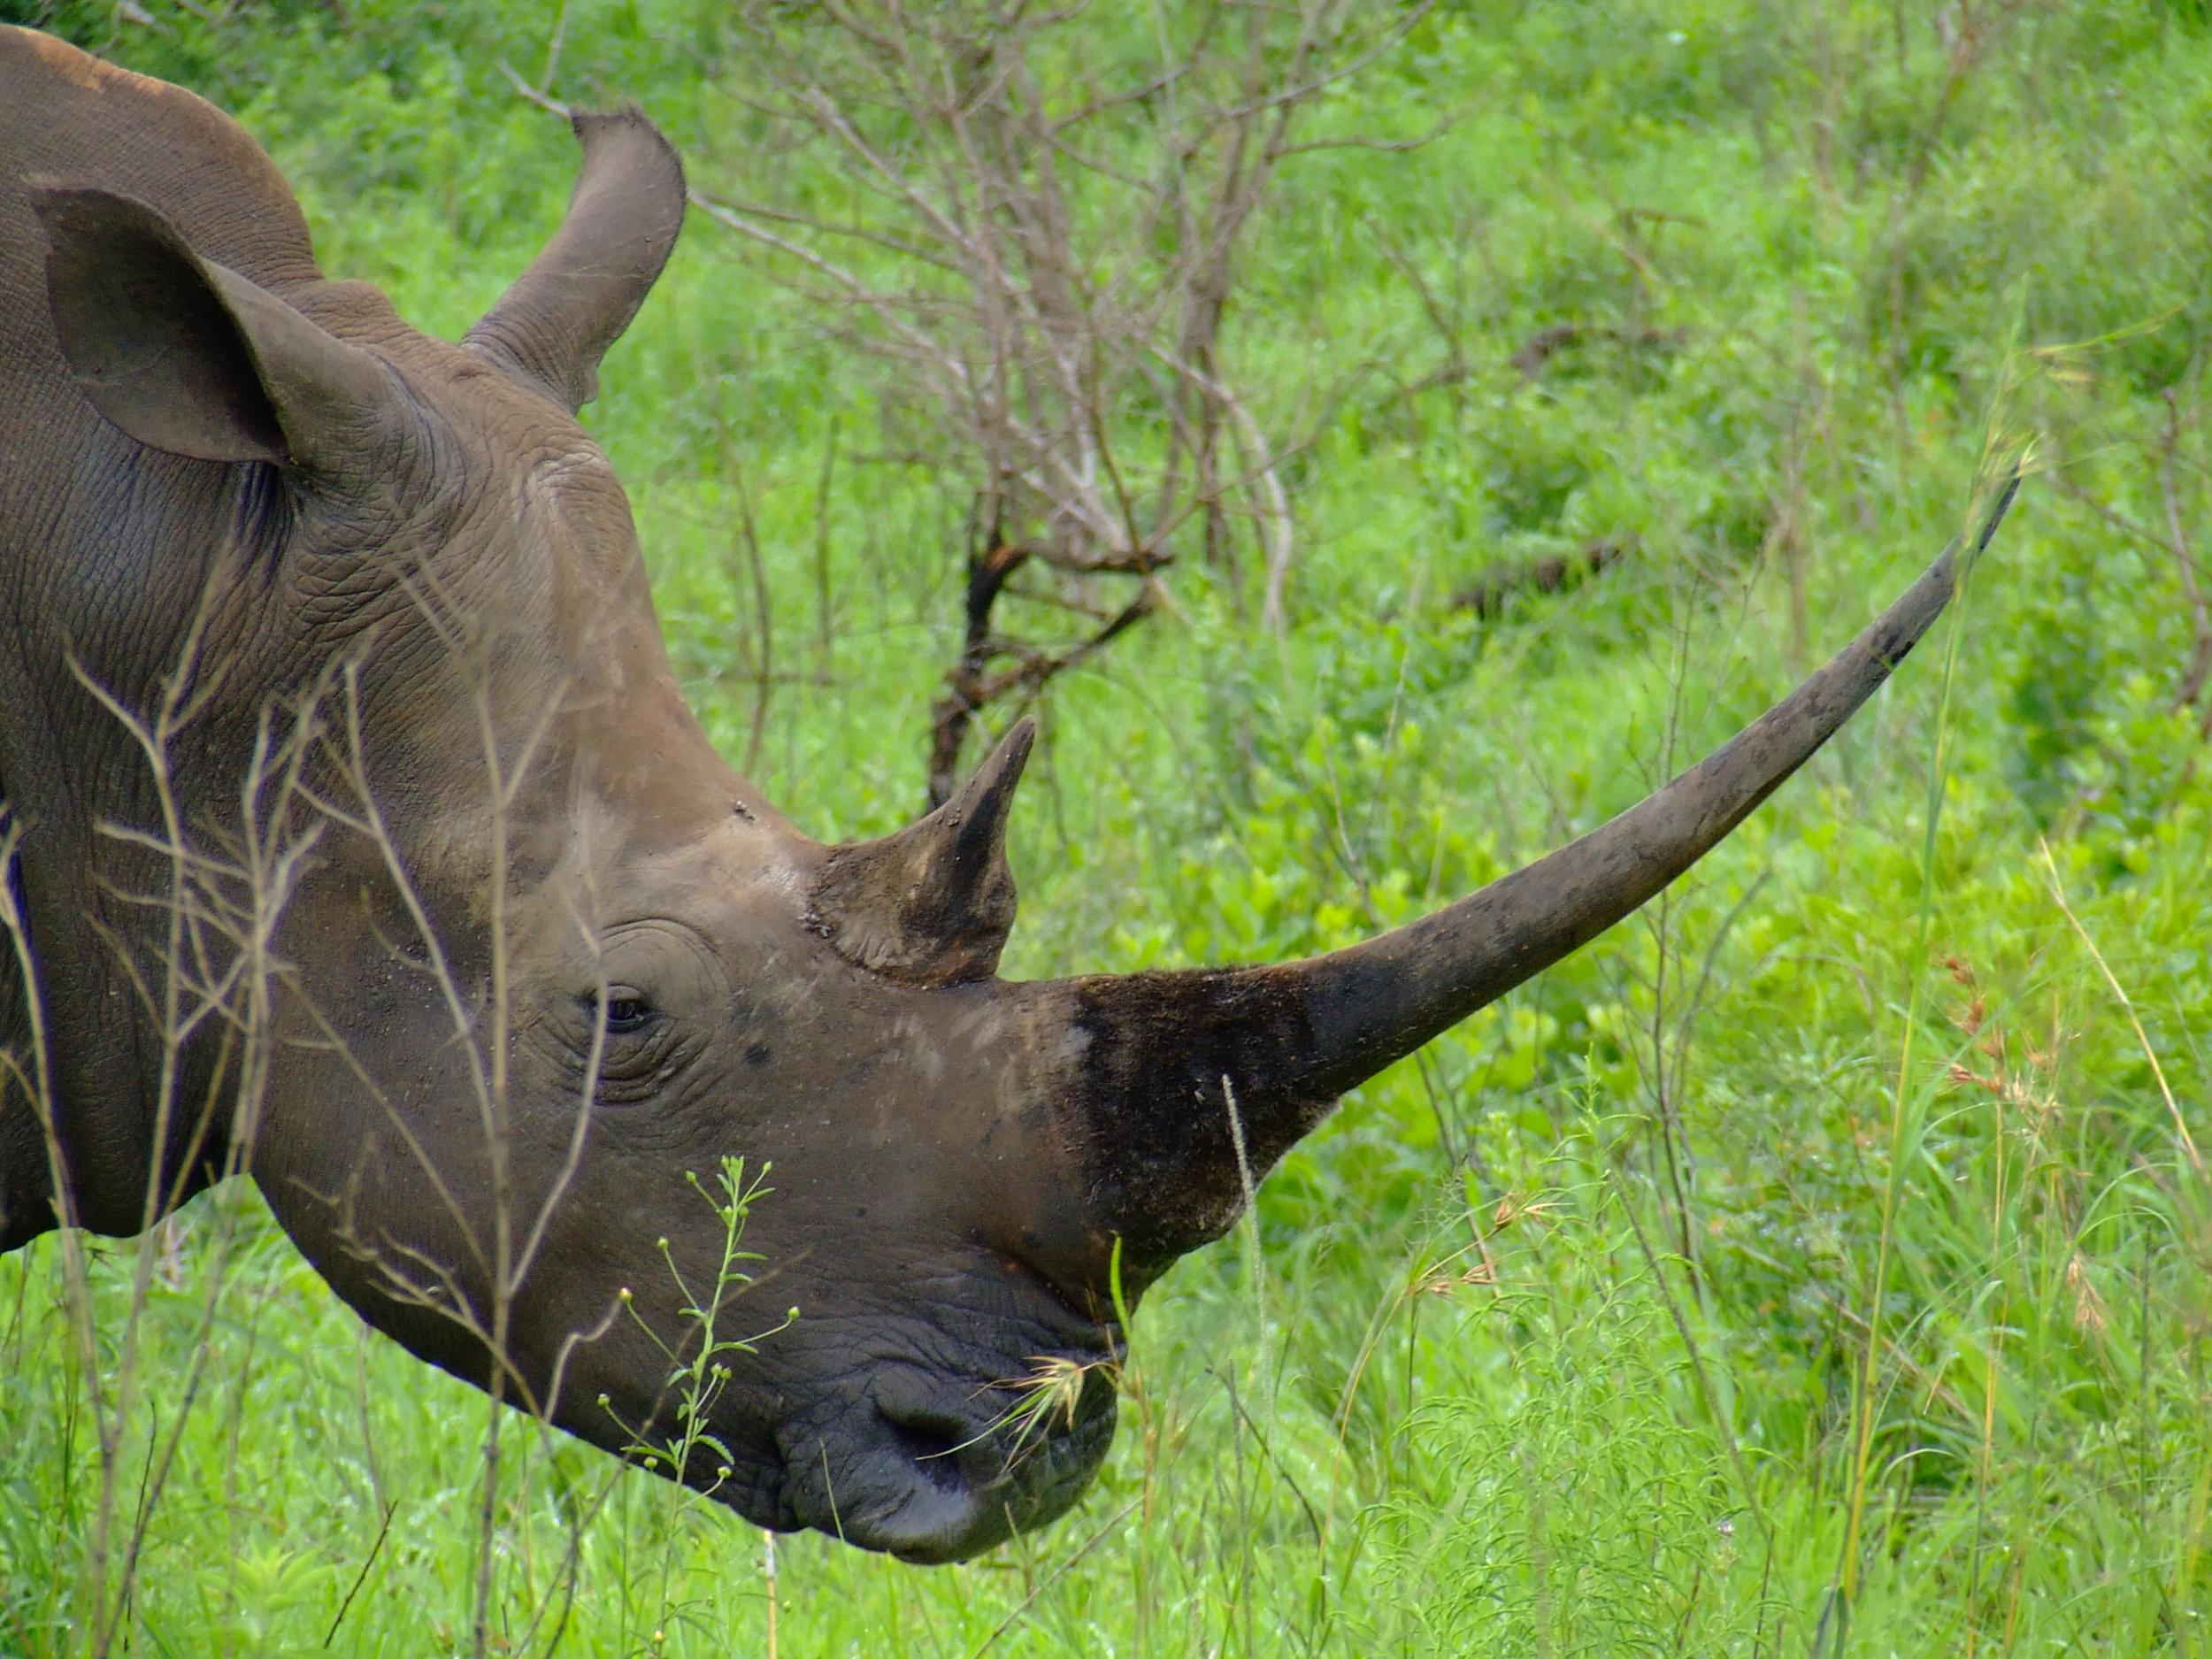 There’s a good chance of spotting rhinos on a wilderness trail